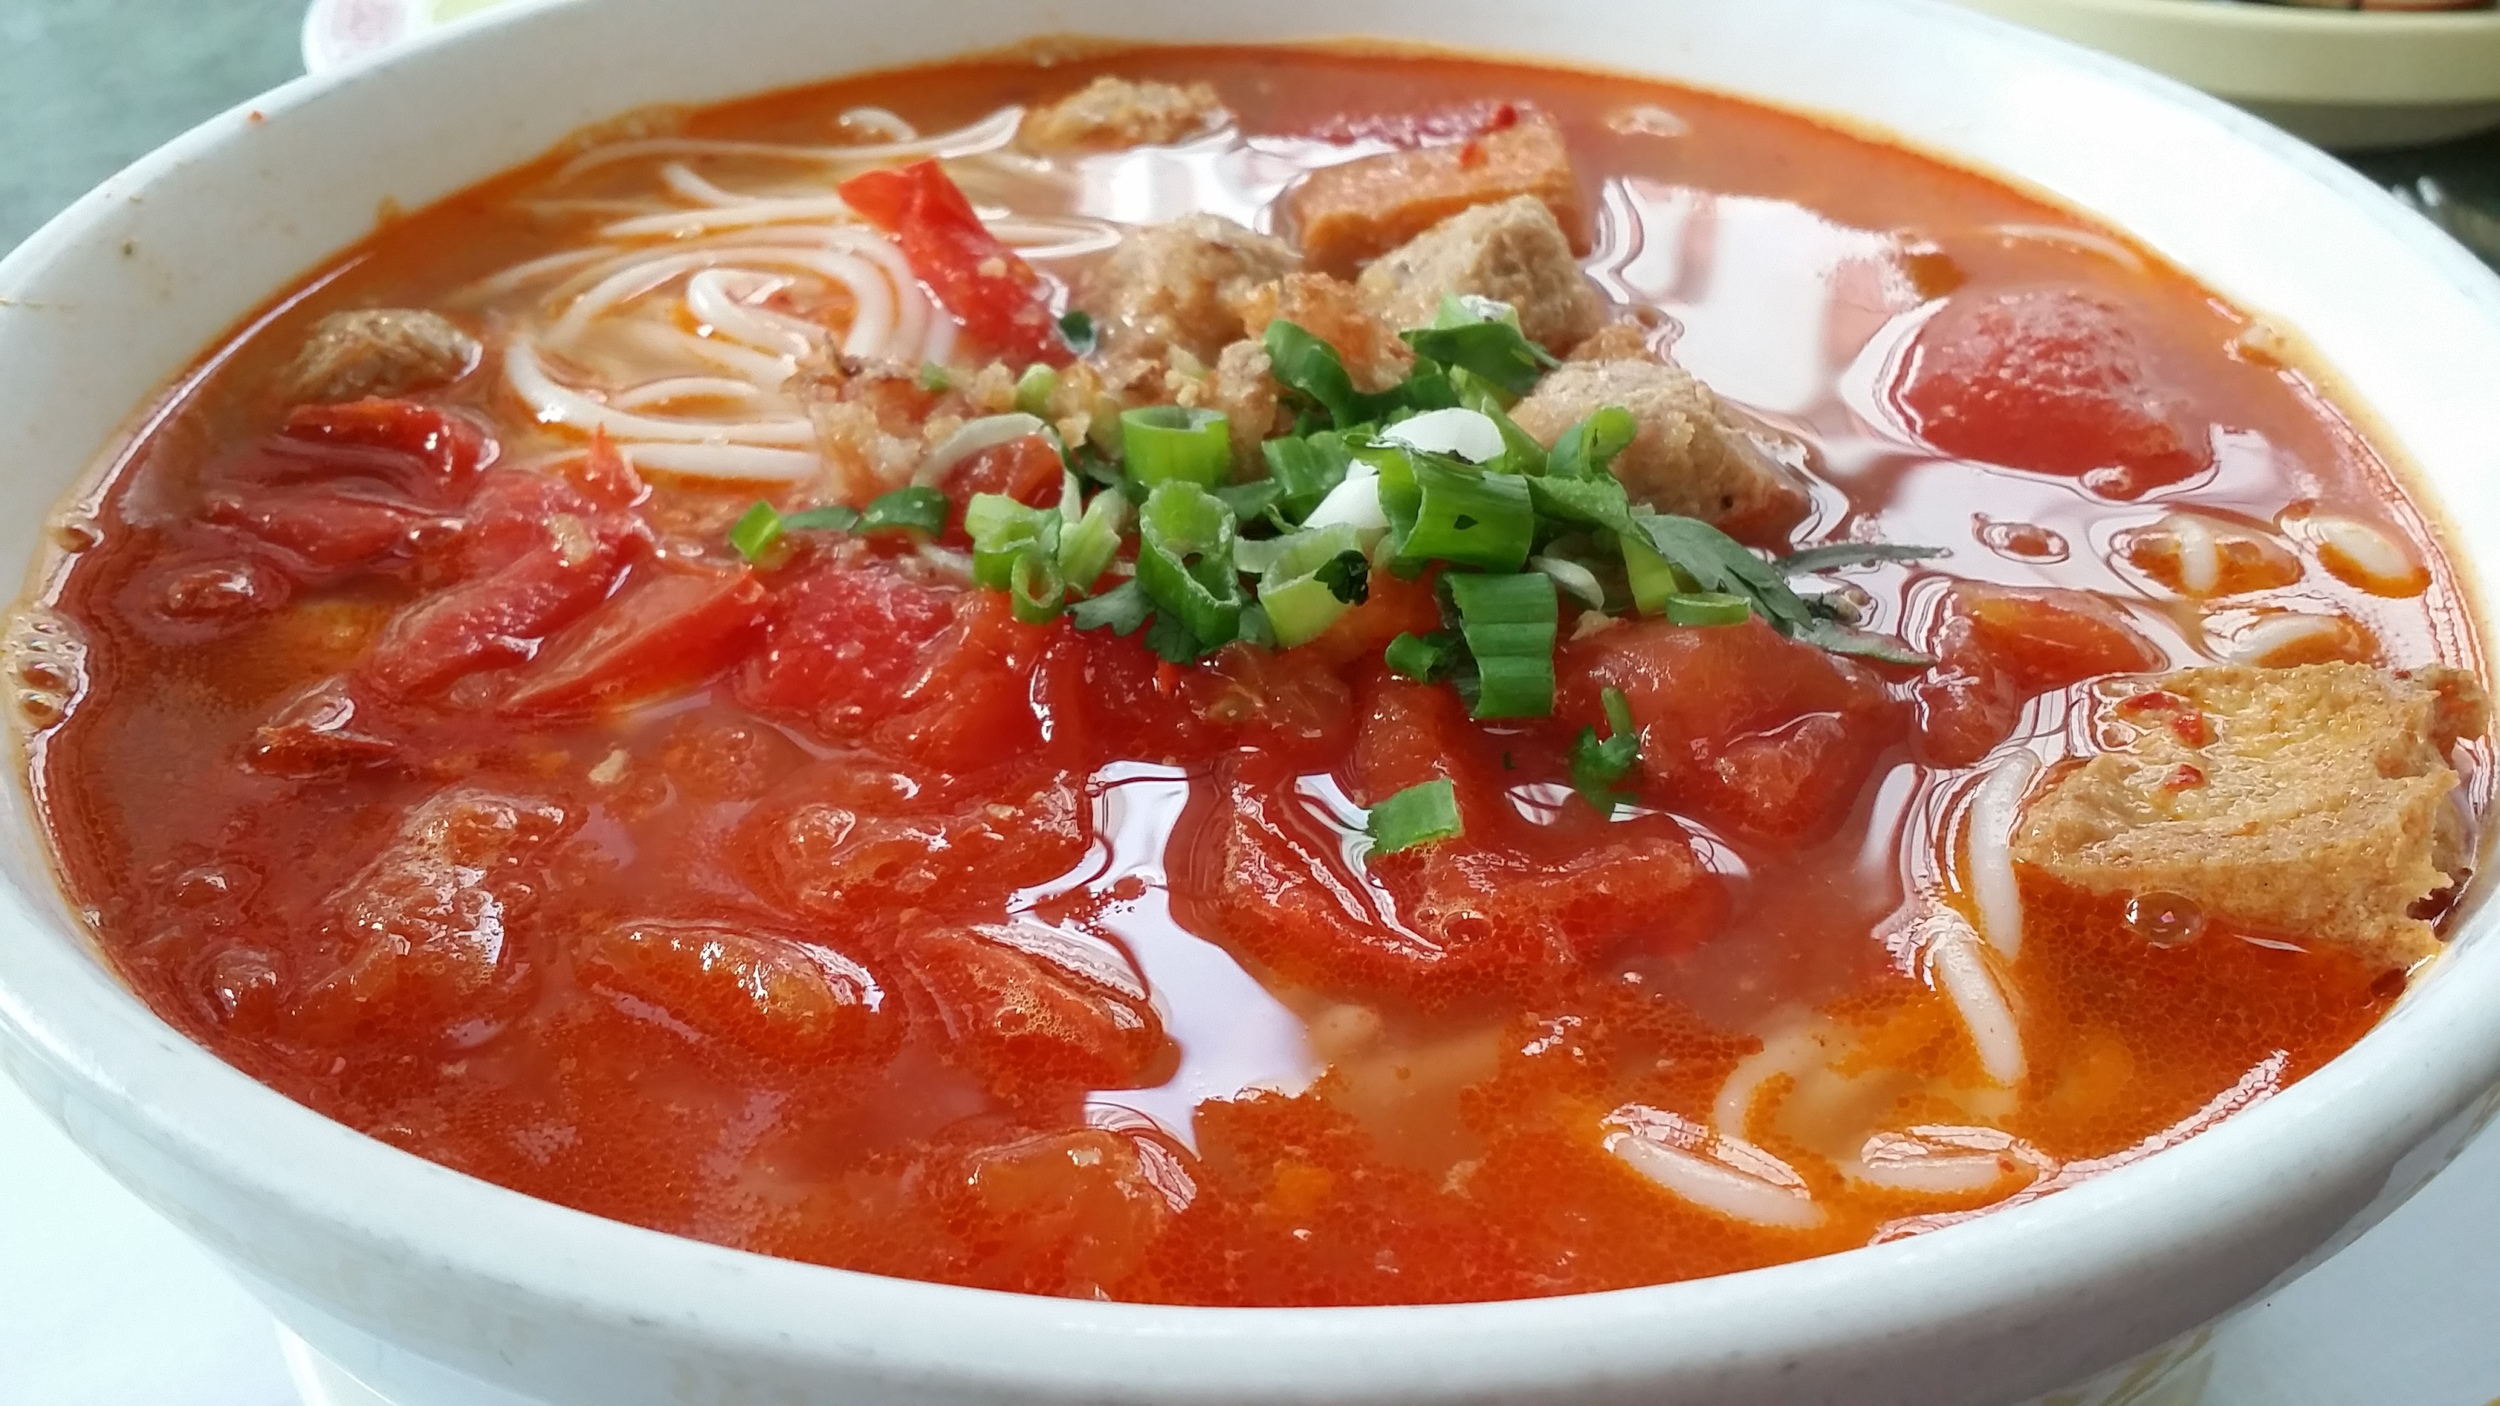 Savory, Sweet, Sour & Spicy Tomato Broth